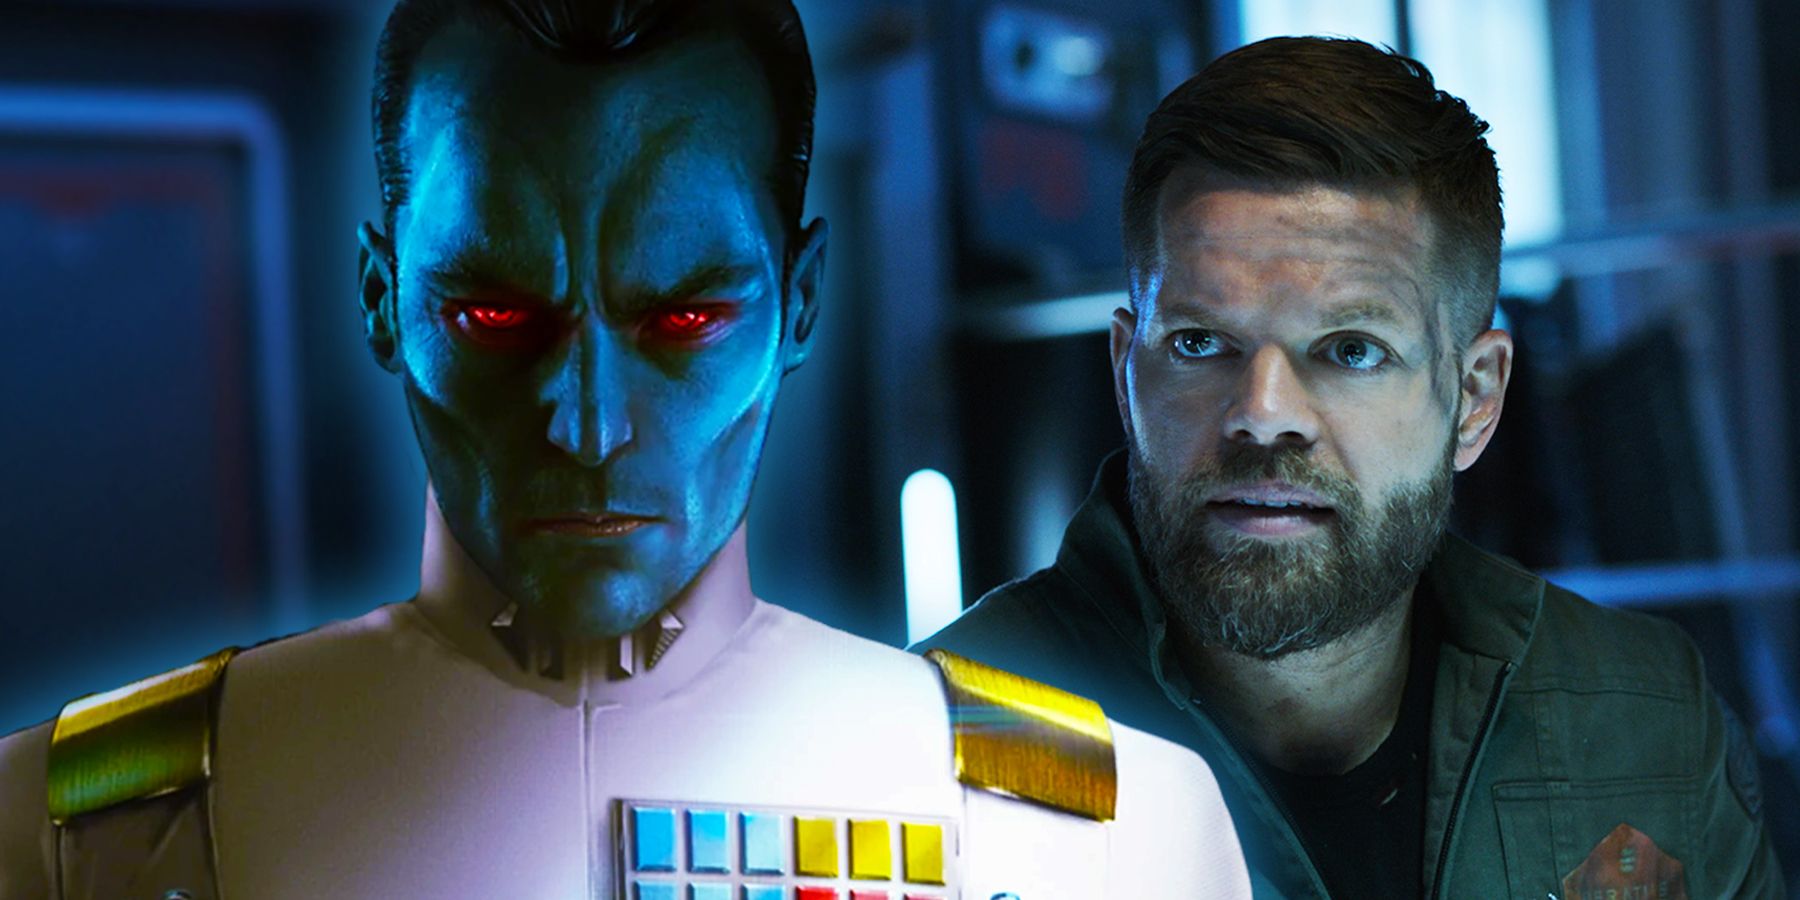 General Thrawn of Star Wars and Wes Chatham as Amos Burton in the Expanse.